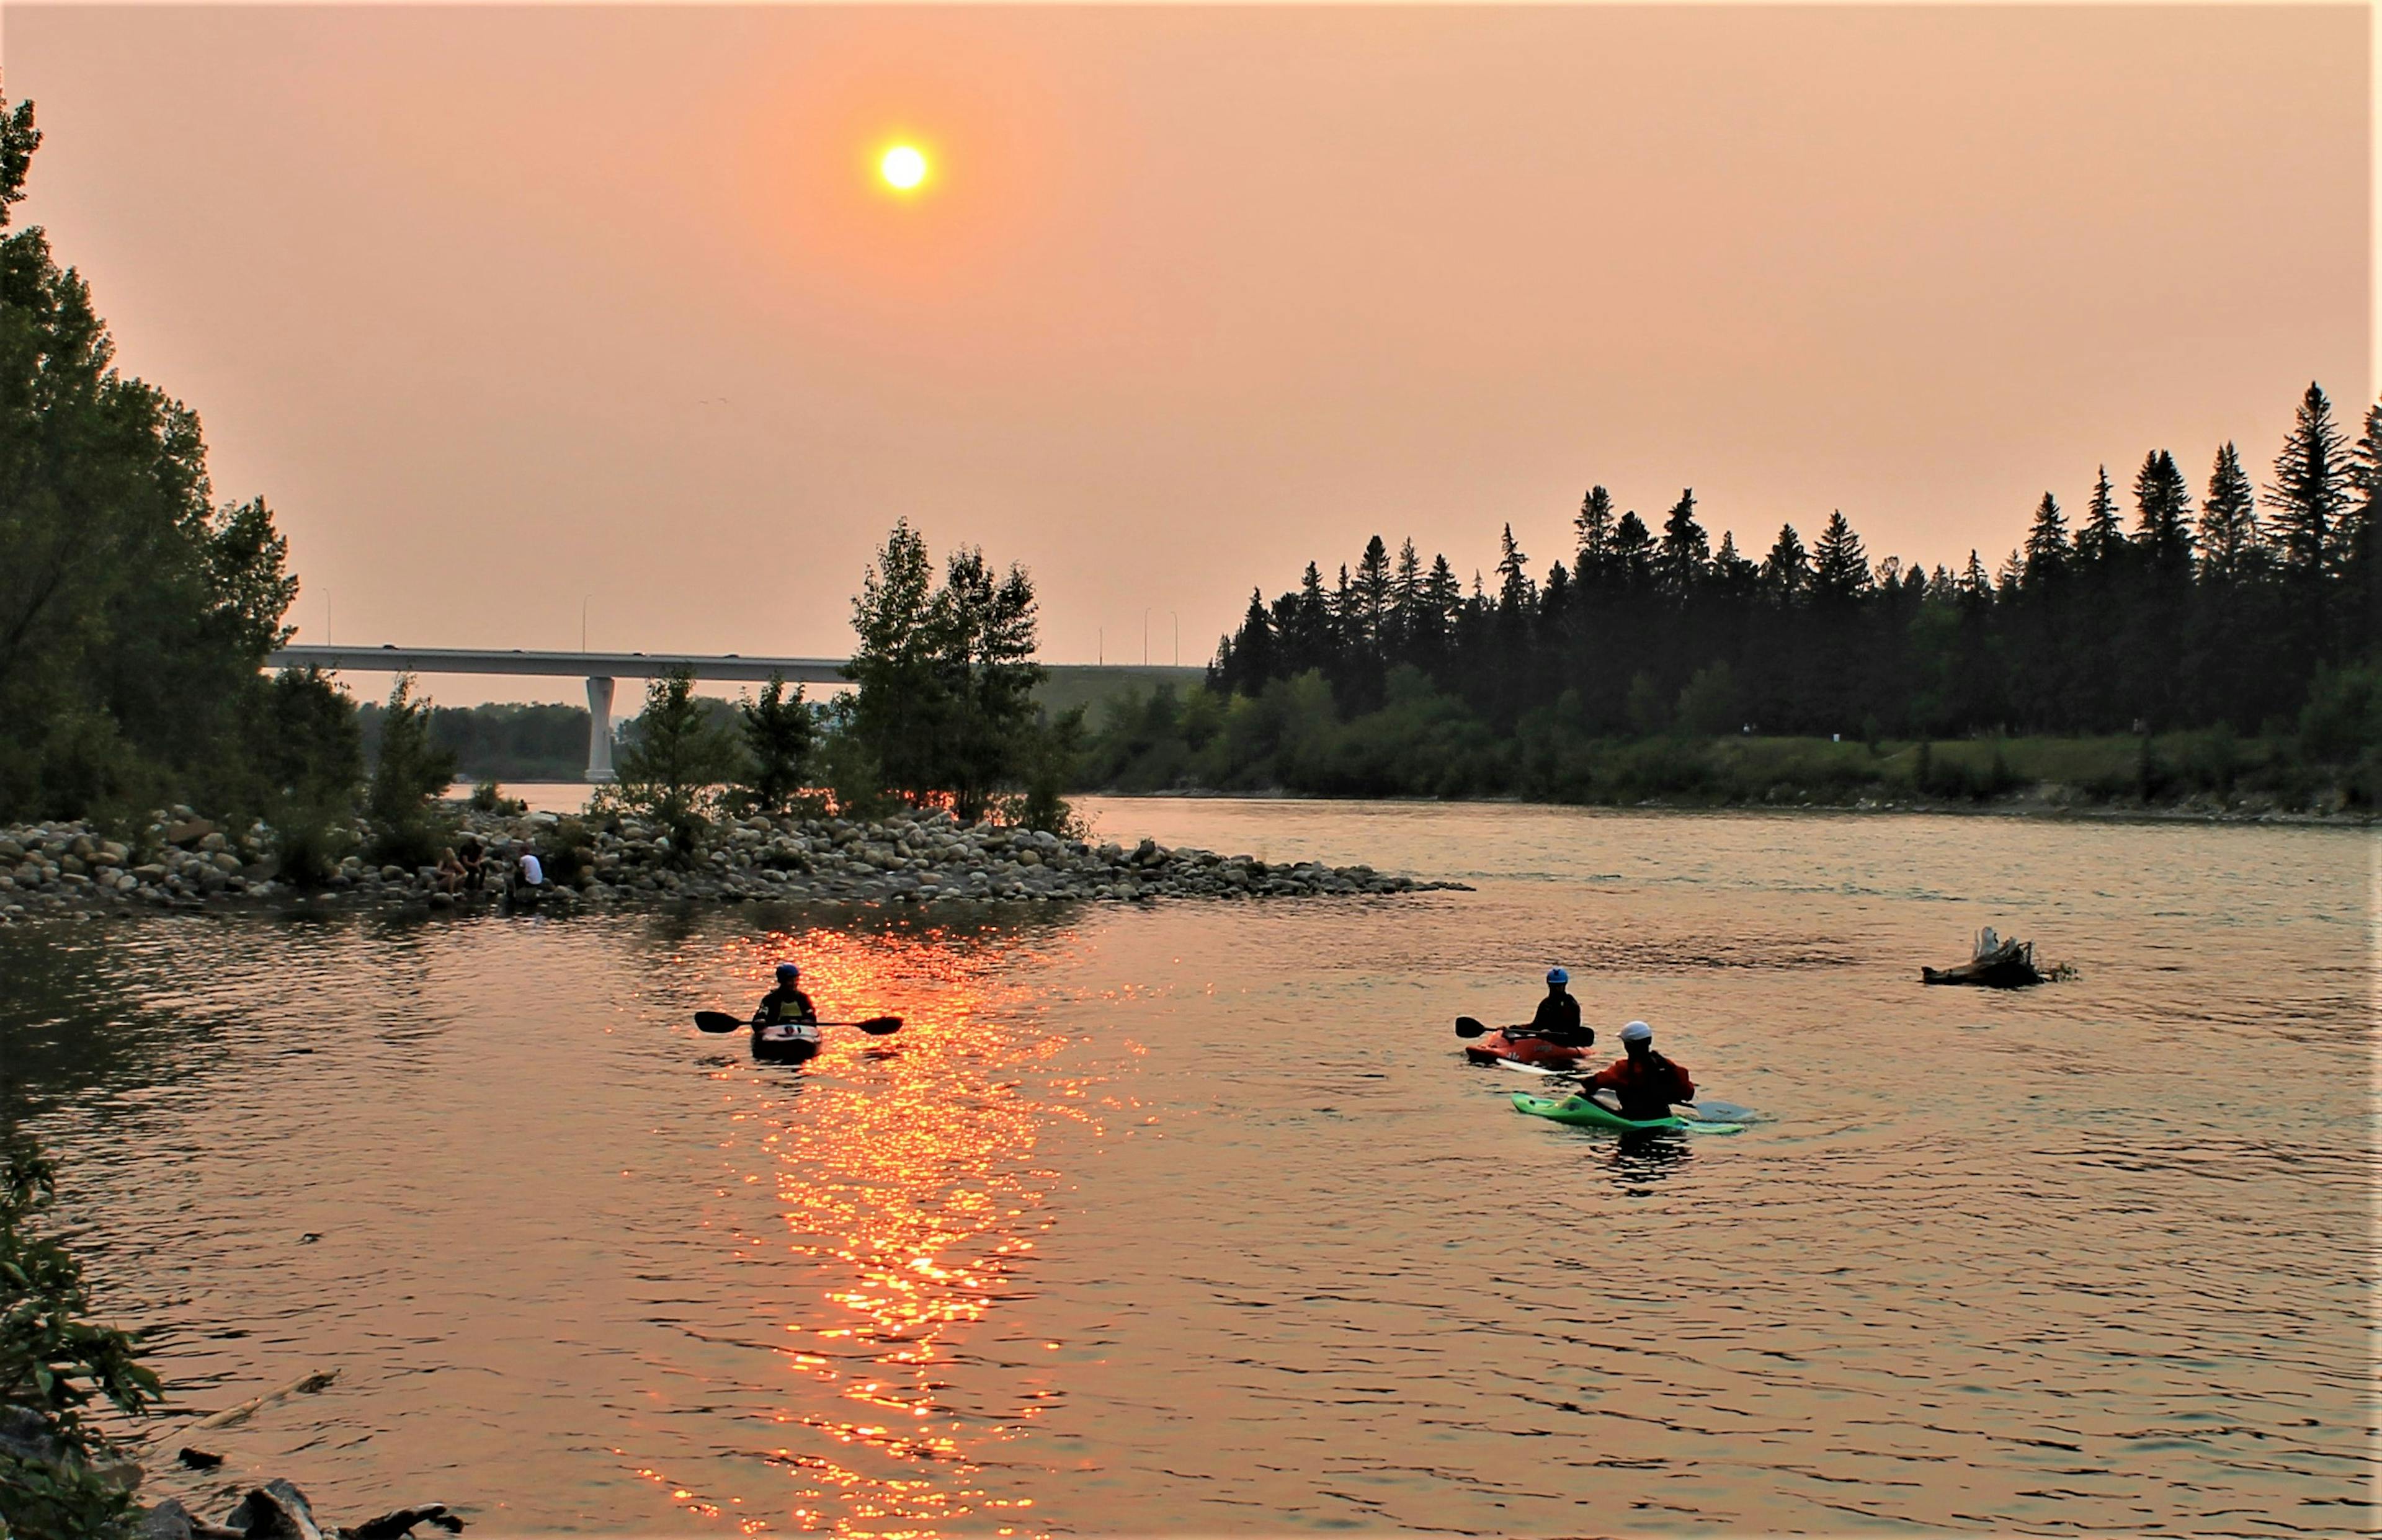 A group Kayaking on the Bow River